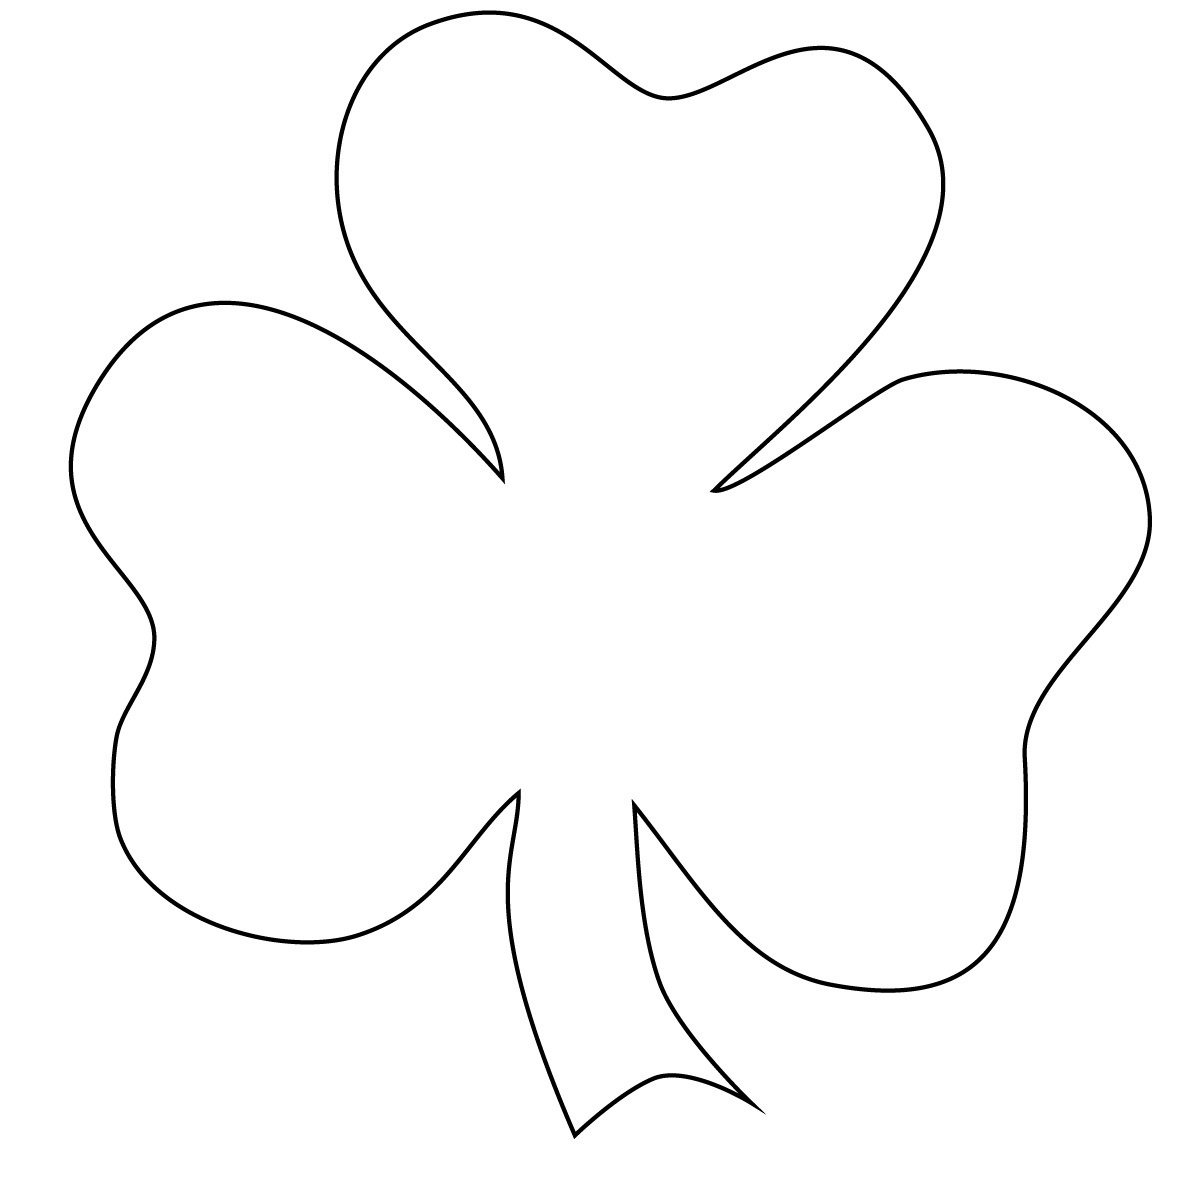 Free Printable Shamrock Coloring Pages For Kids - Free Printable Shamrocks